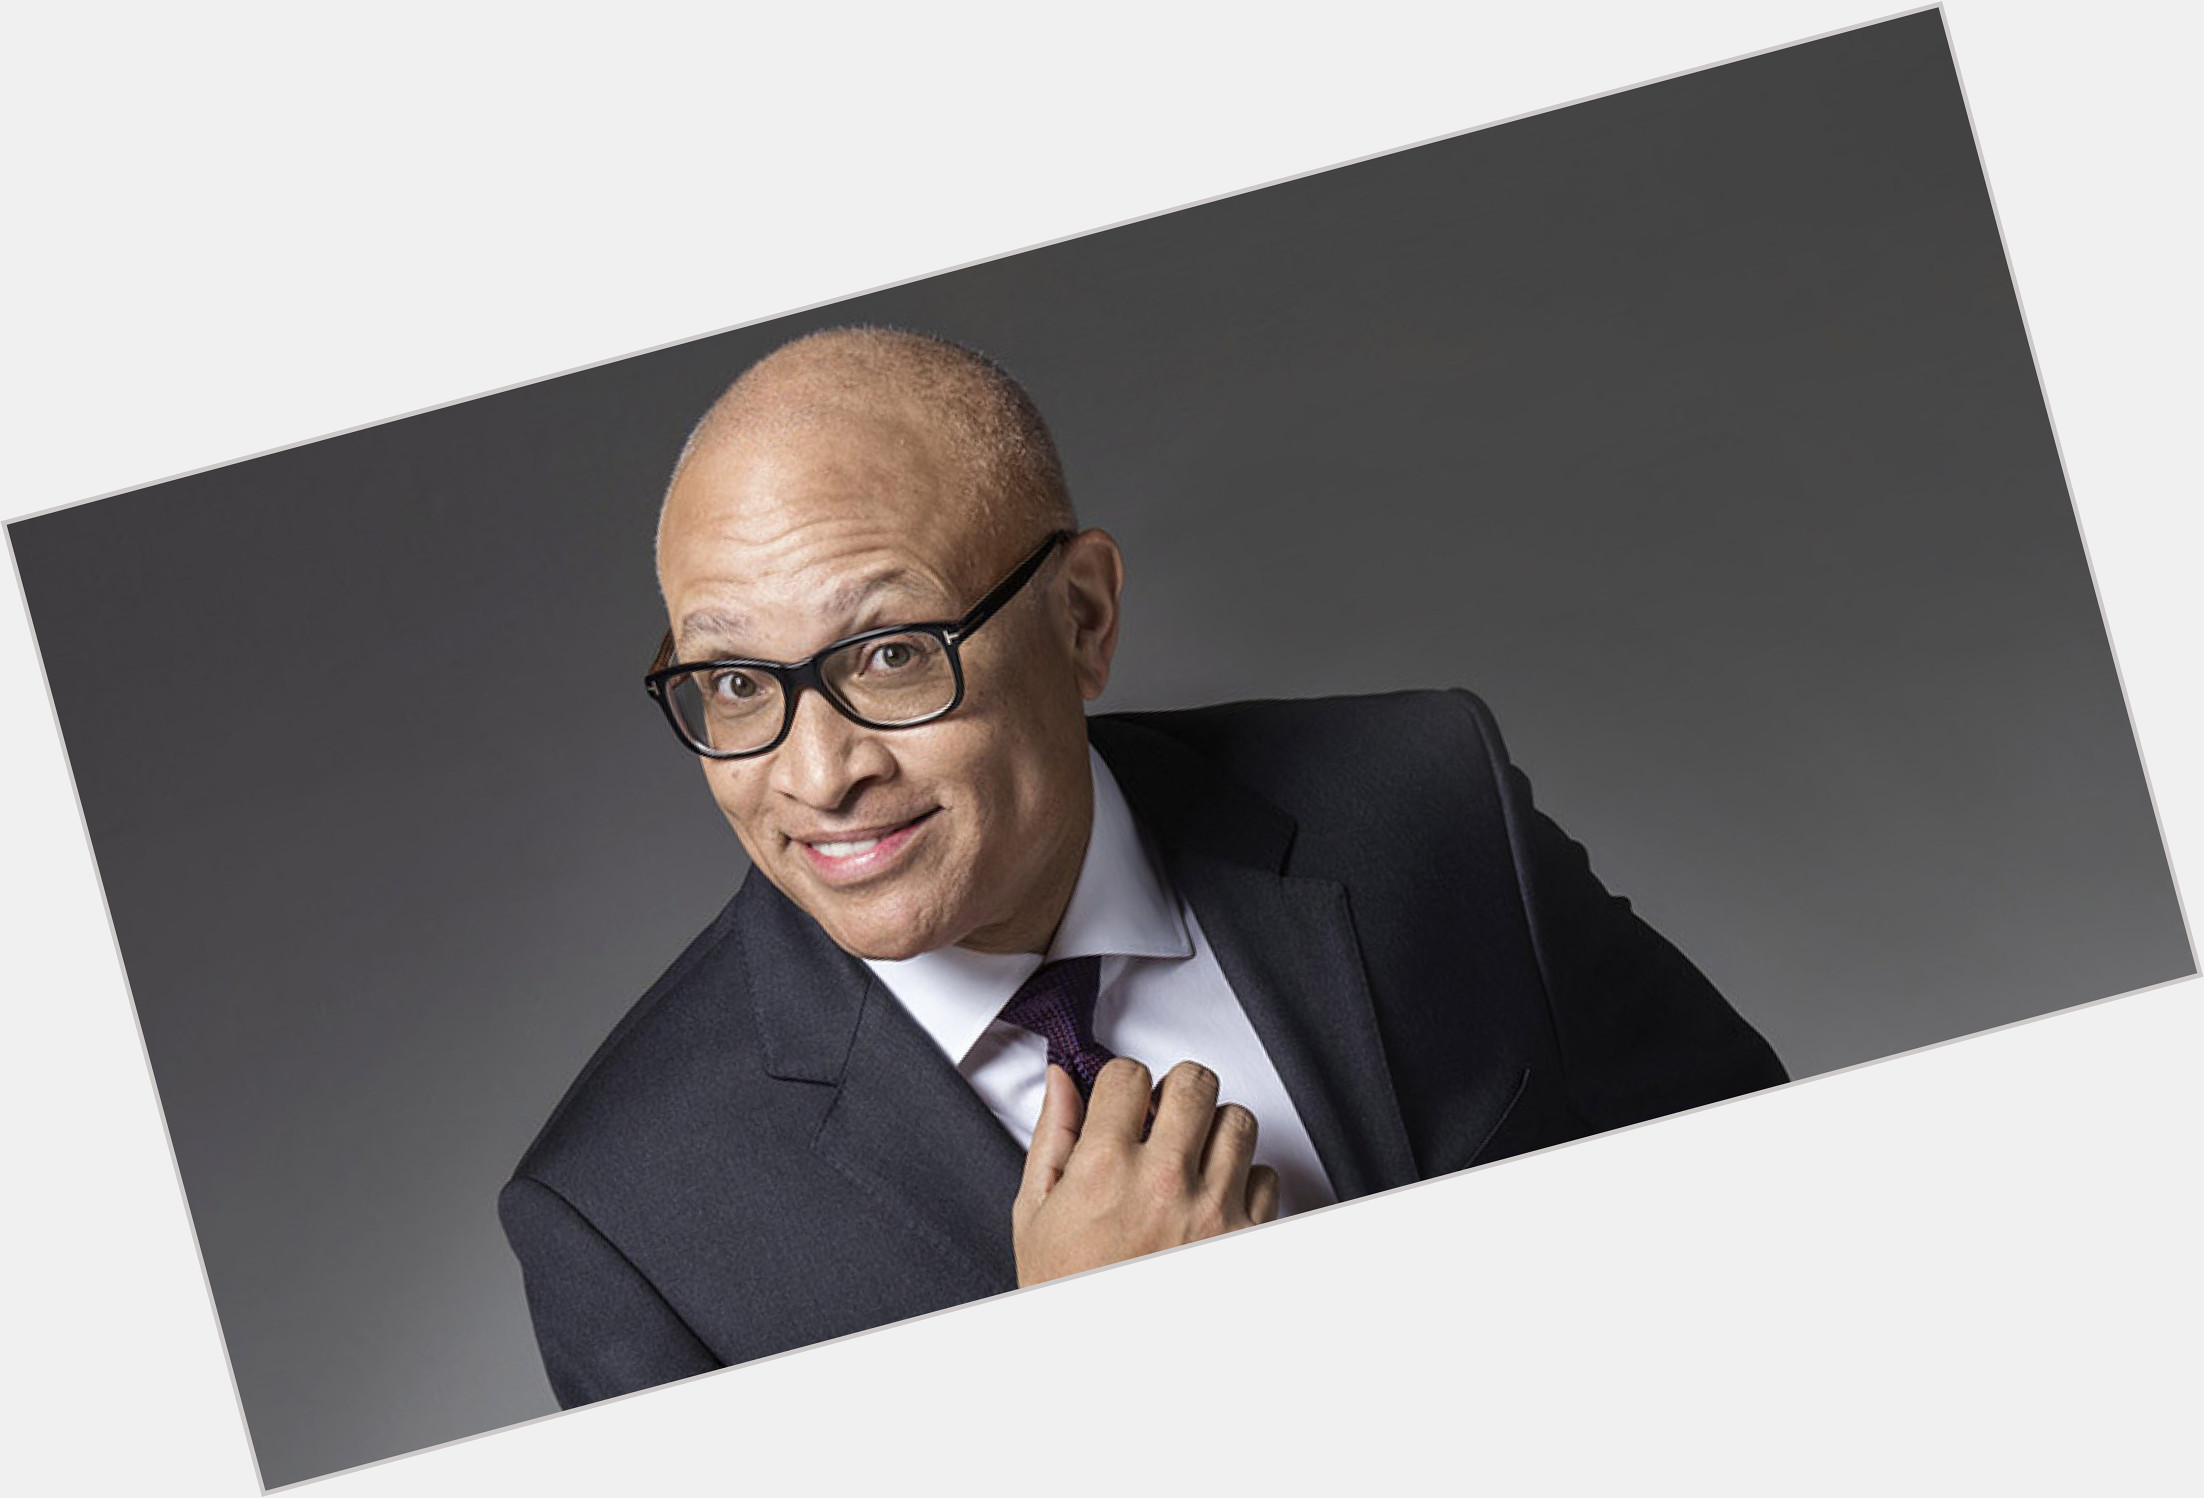 <a href="/hot-men/larry-wilmore/where-dating-news-photos">Larry Wilmore</a>  